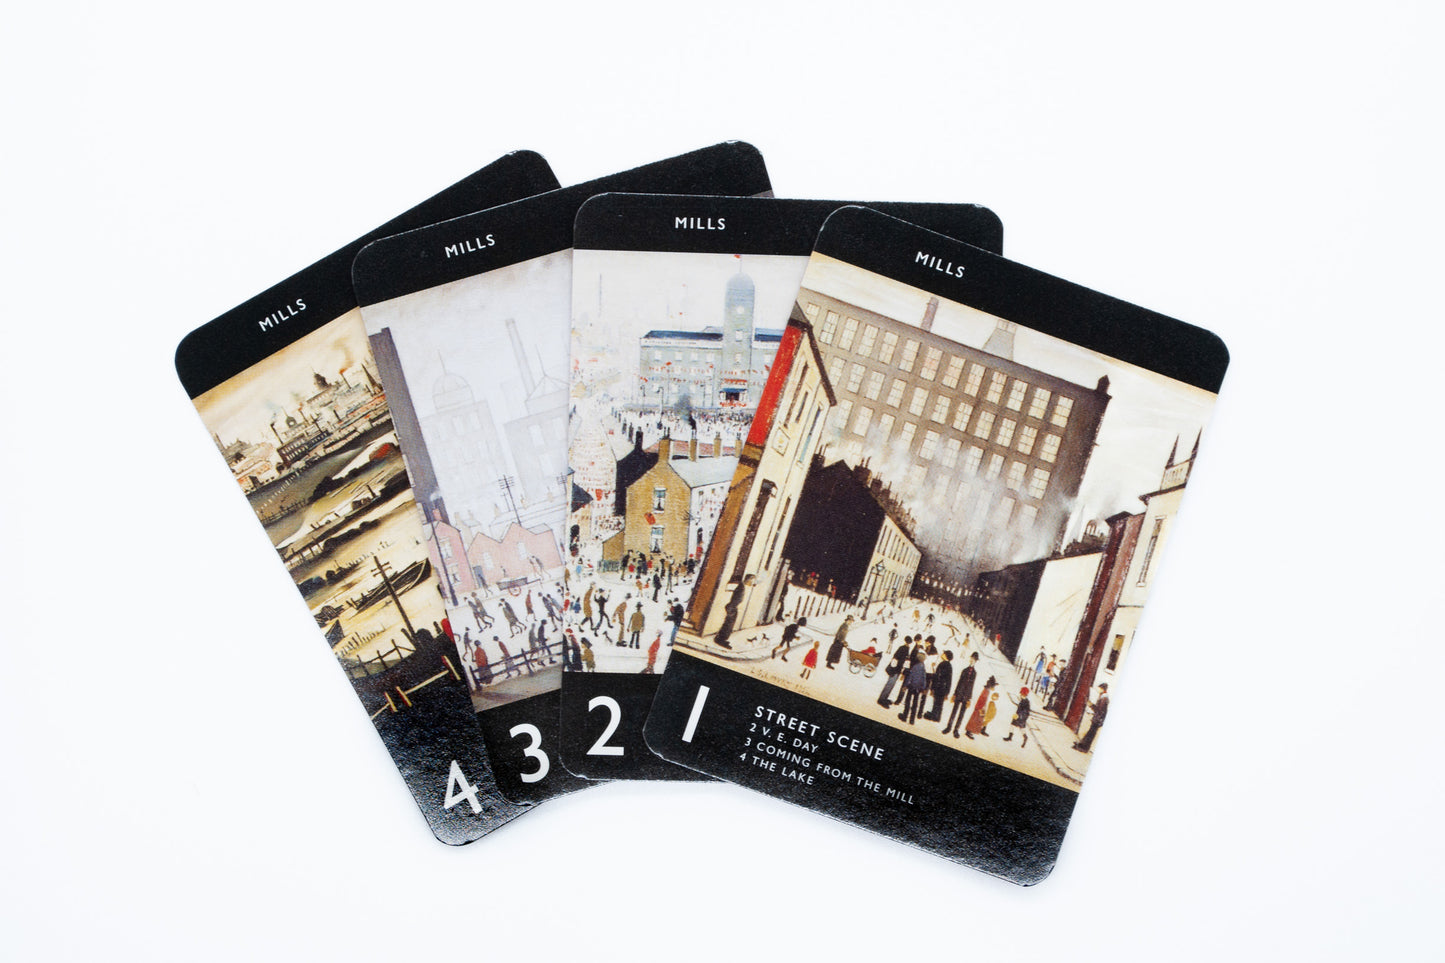 The L.S Lowry Edition Memory Game